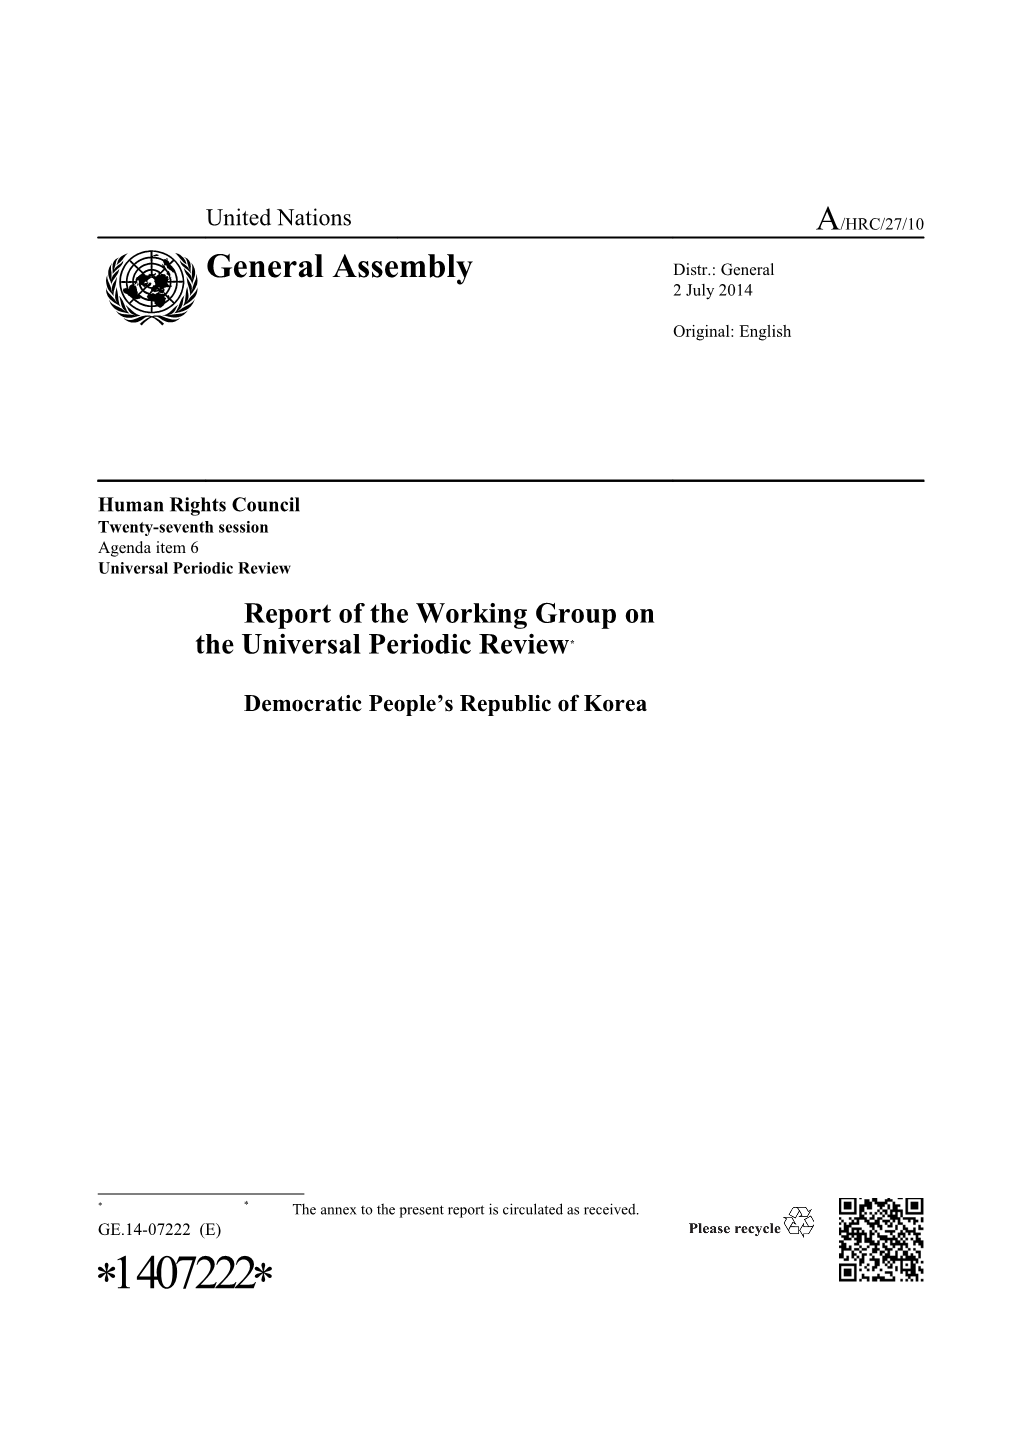 Report of the Working Group on the Universal Periodic Review - Democratic People's Republic